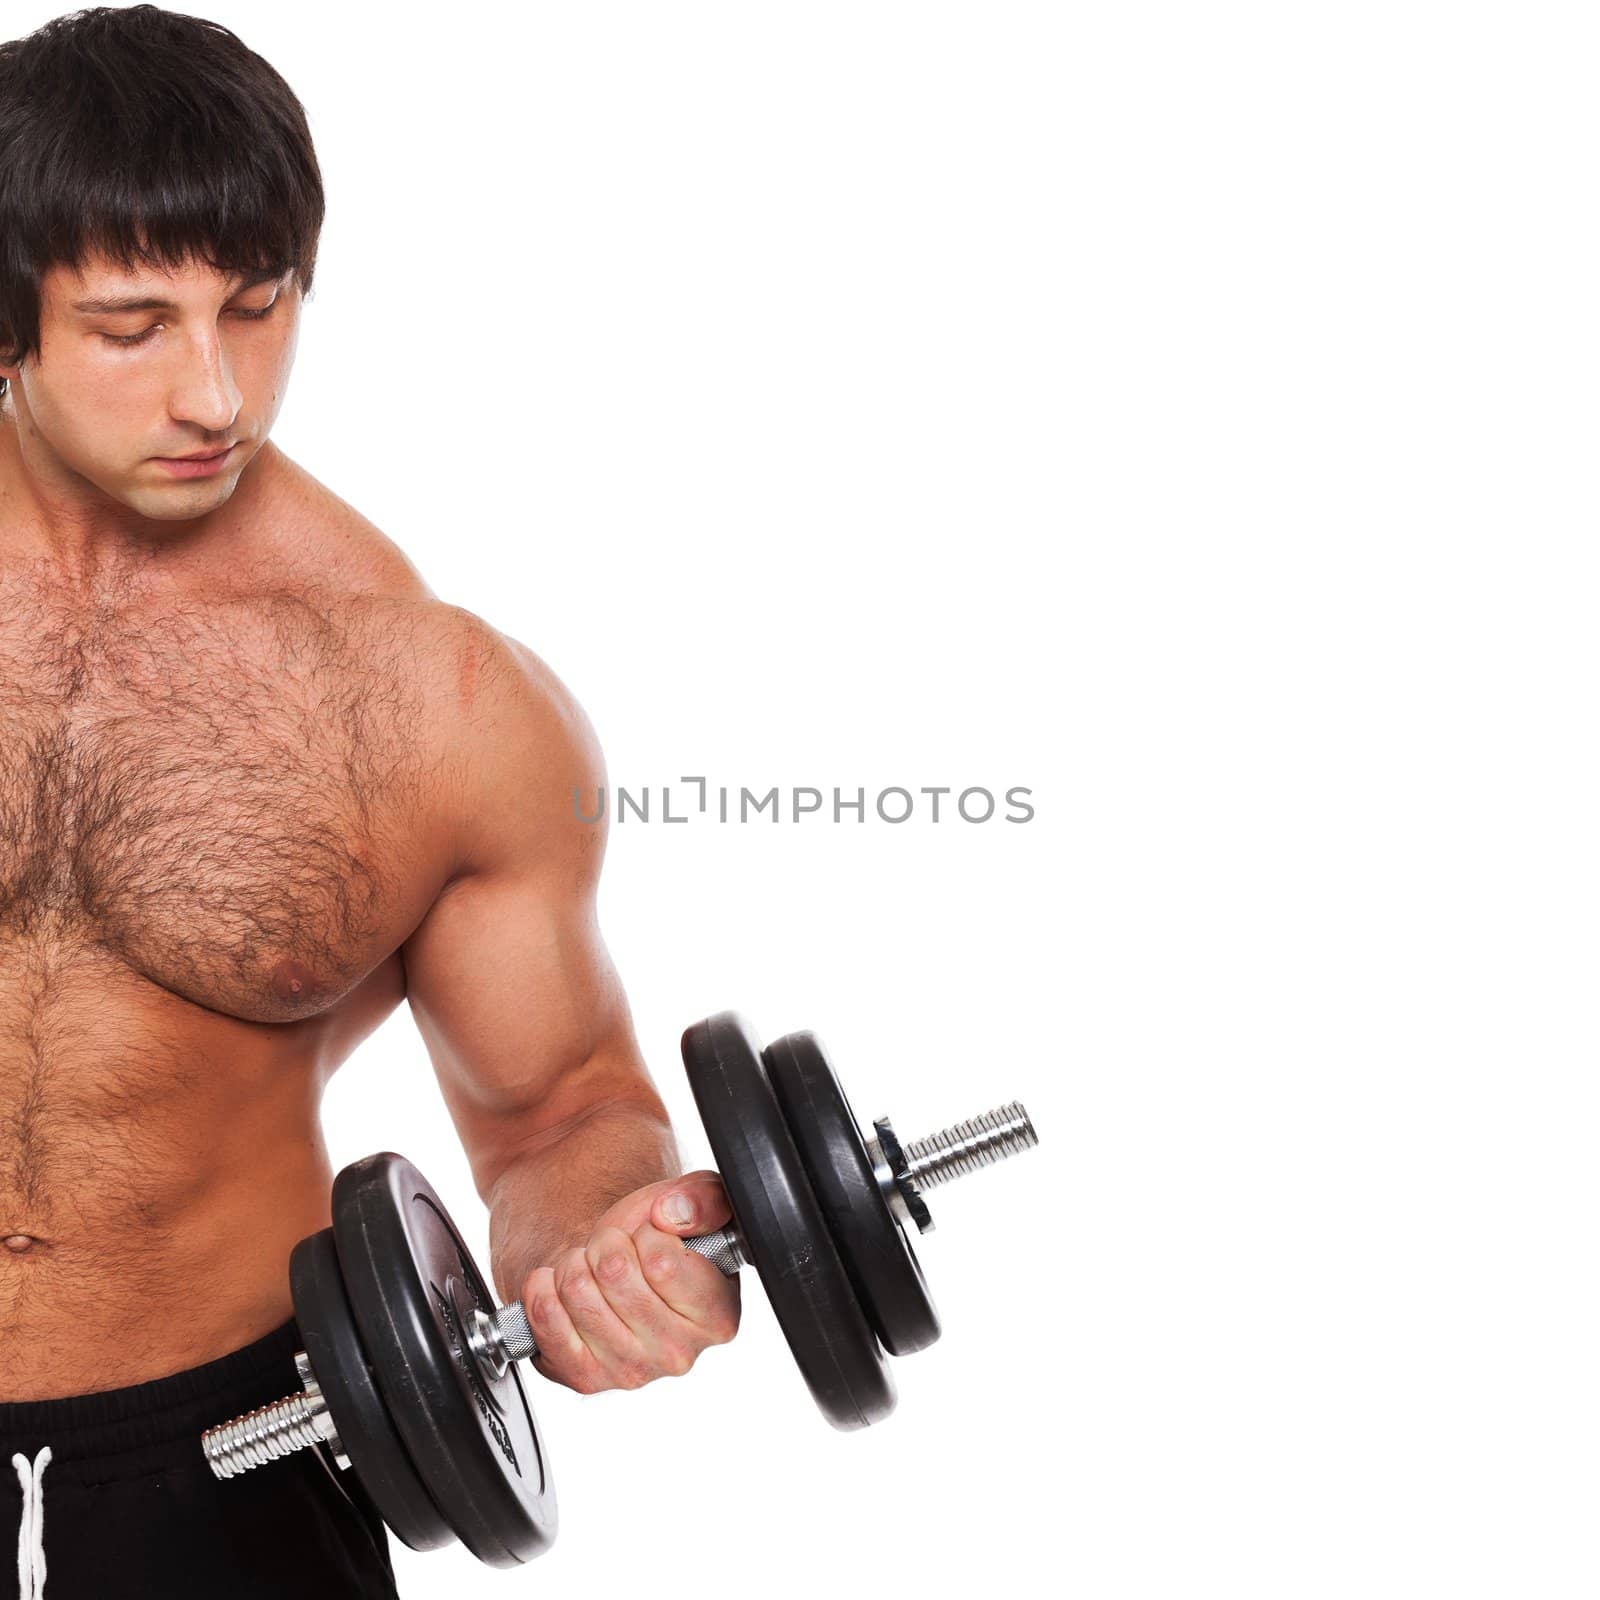 Muscular guy exercises with dumbbell on a white background